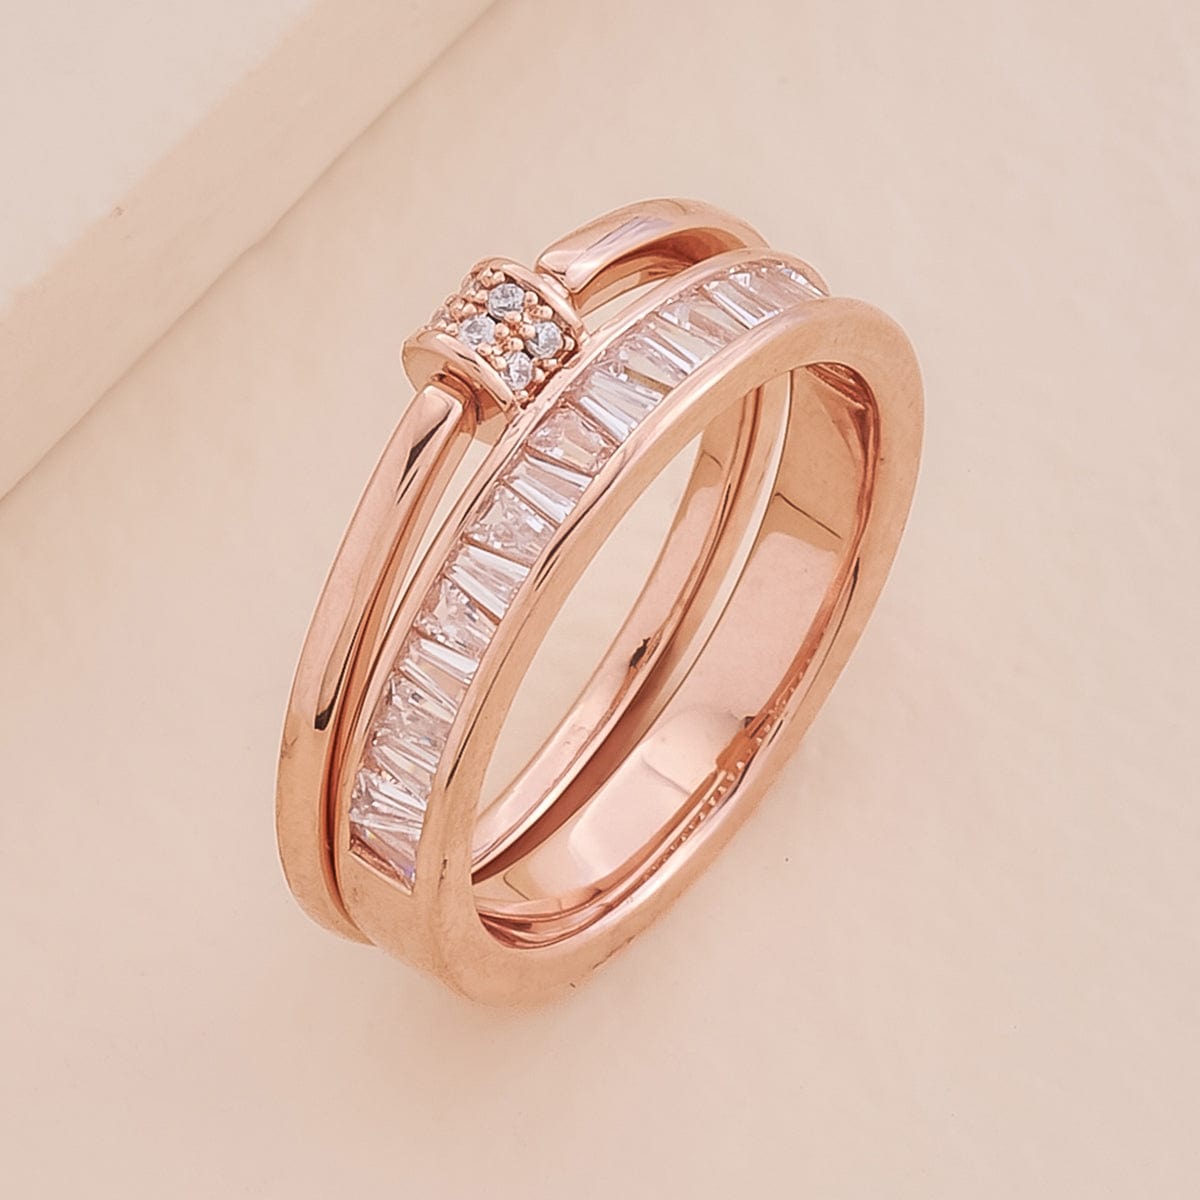 Jewelry For Women Rings 15Pcs Gold Rings Set For Women Bohemian Rings For  Girls Gem Rings Joint Knot Ring Sets For Teens Party Fesvital Jewelry Gift  Cute Ring Pack Trendy Jewelry Gift